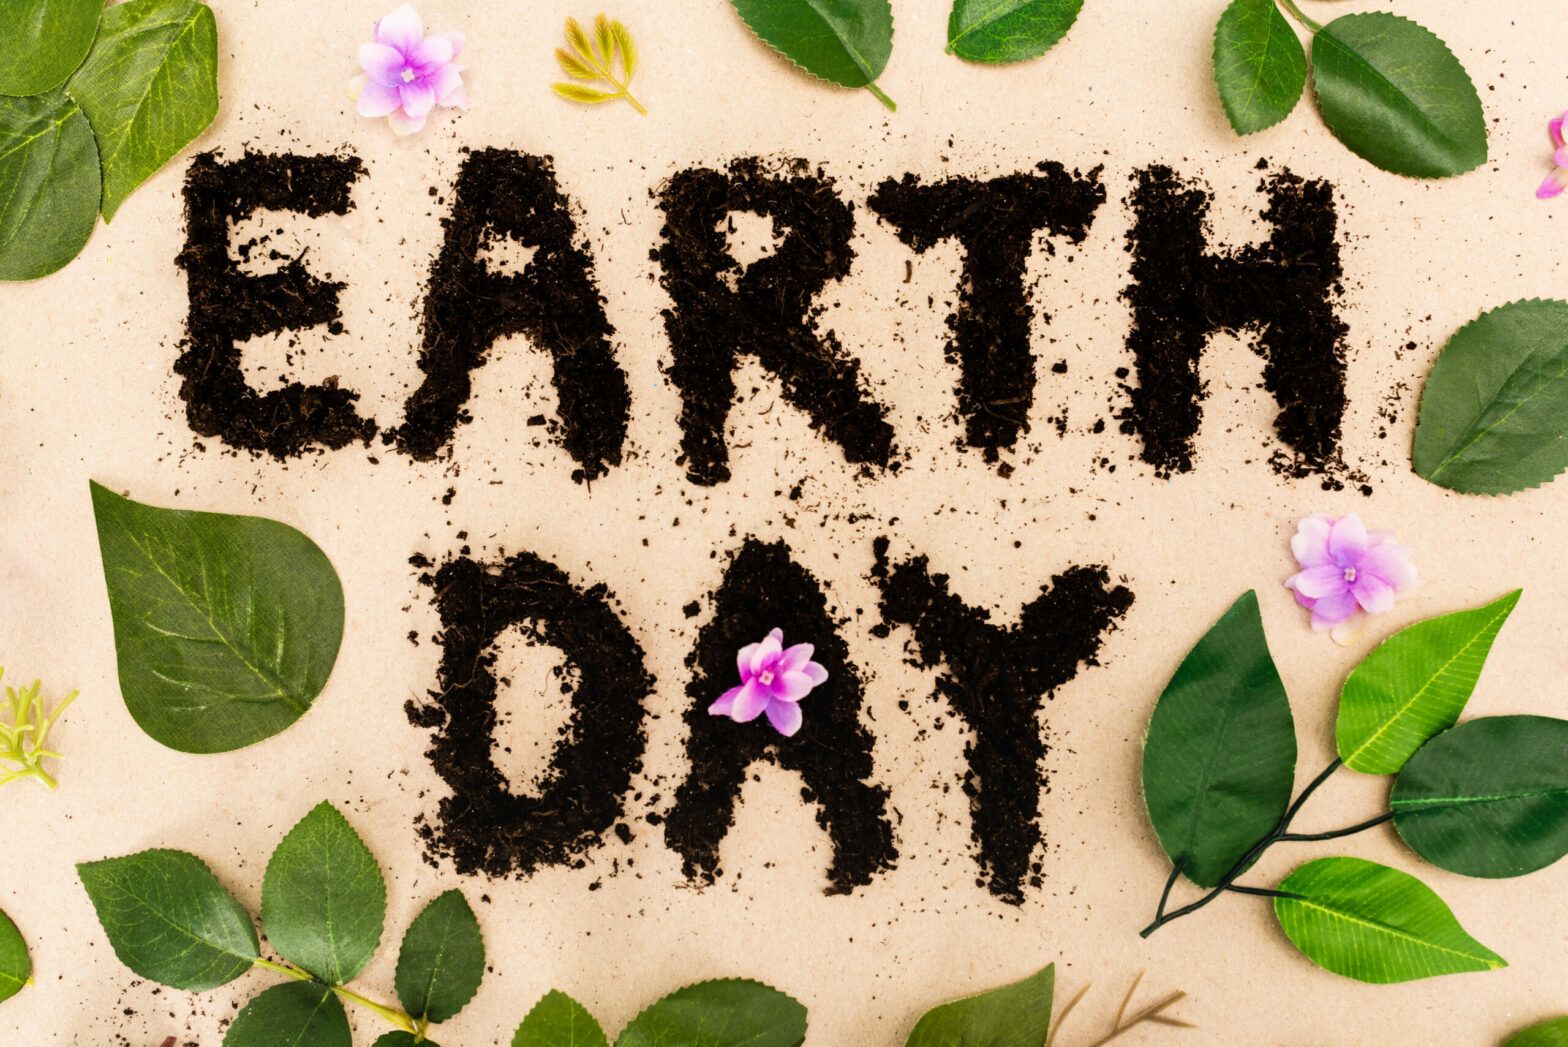 Earth Day: The gap between ambition and action can quickly be bridged